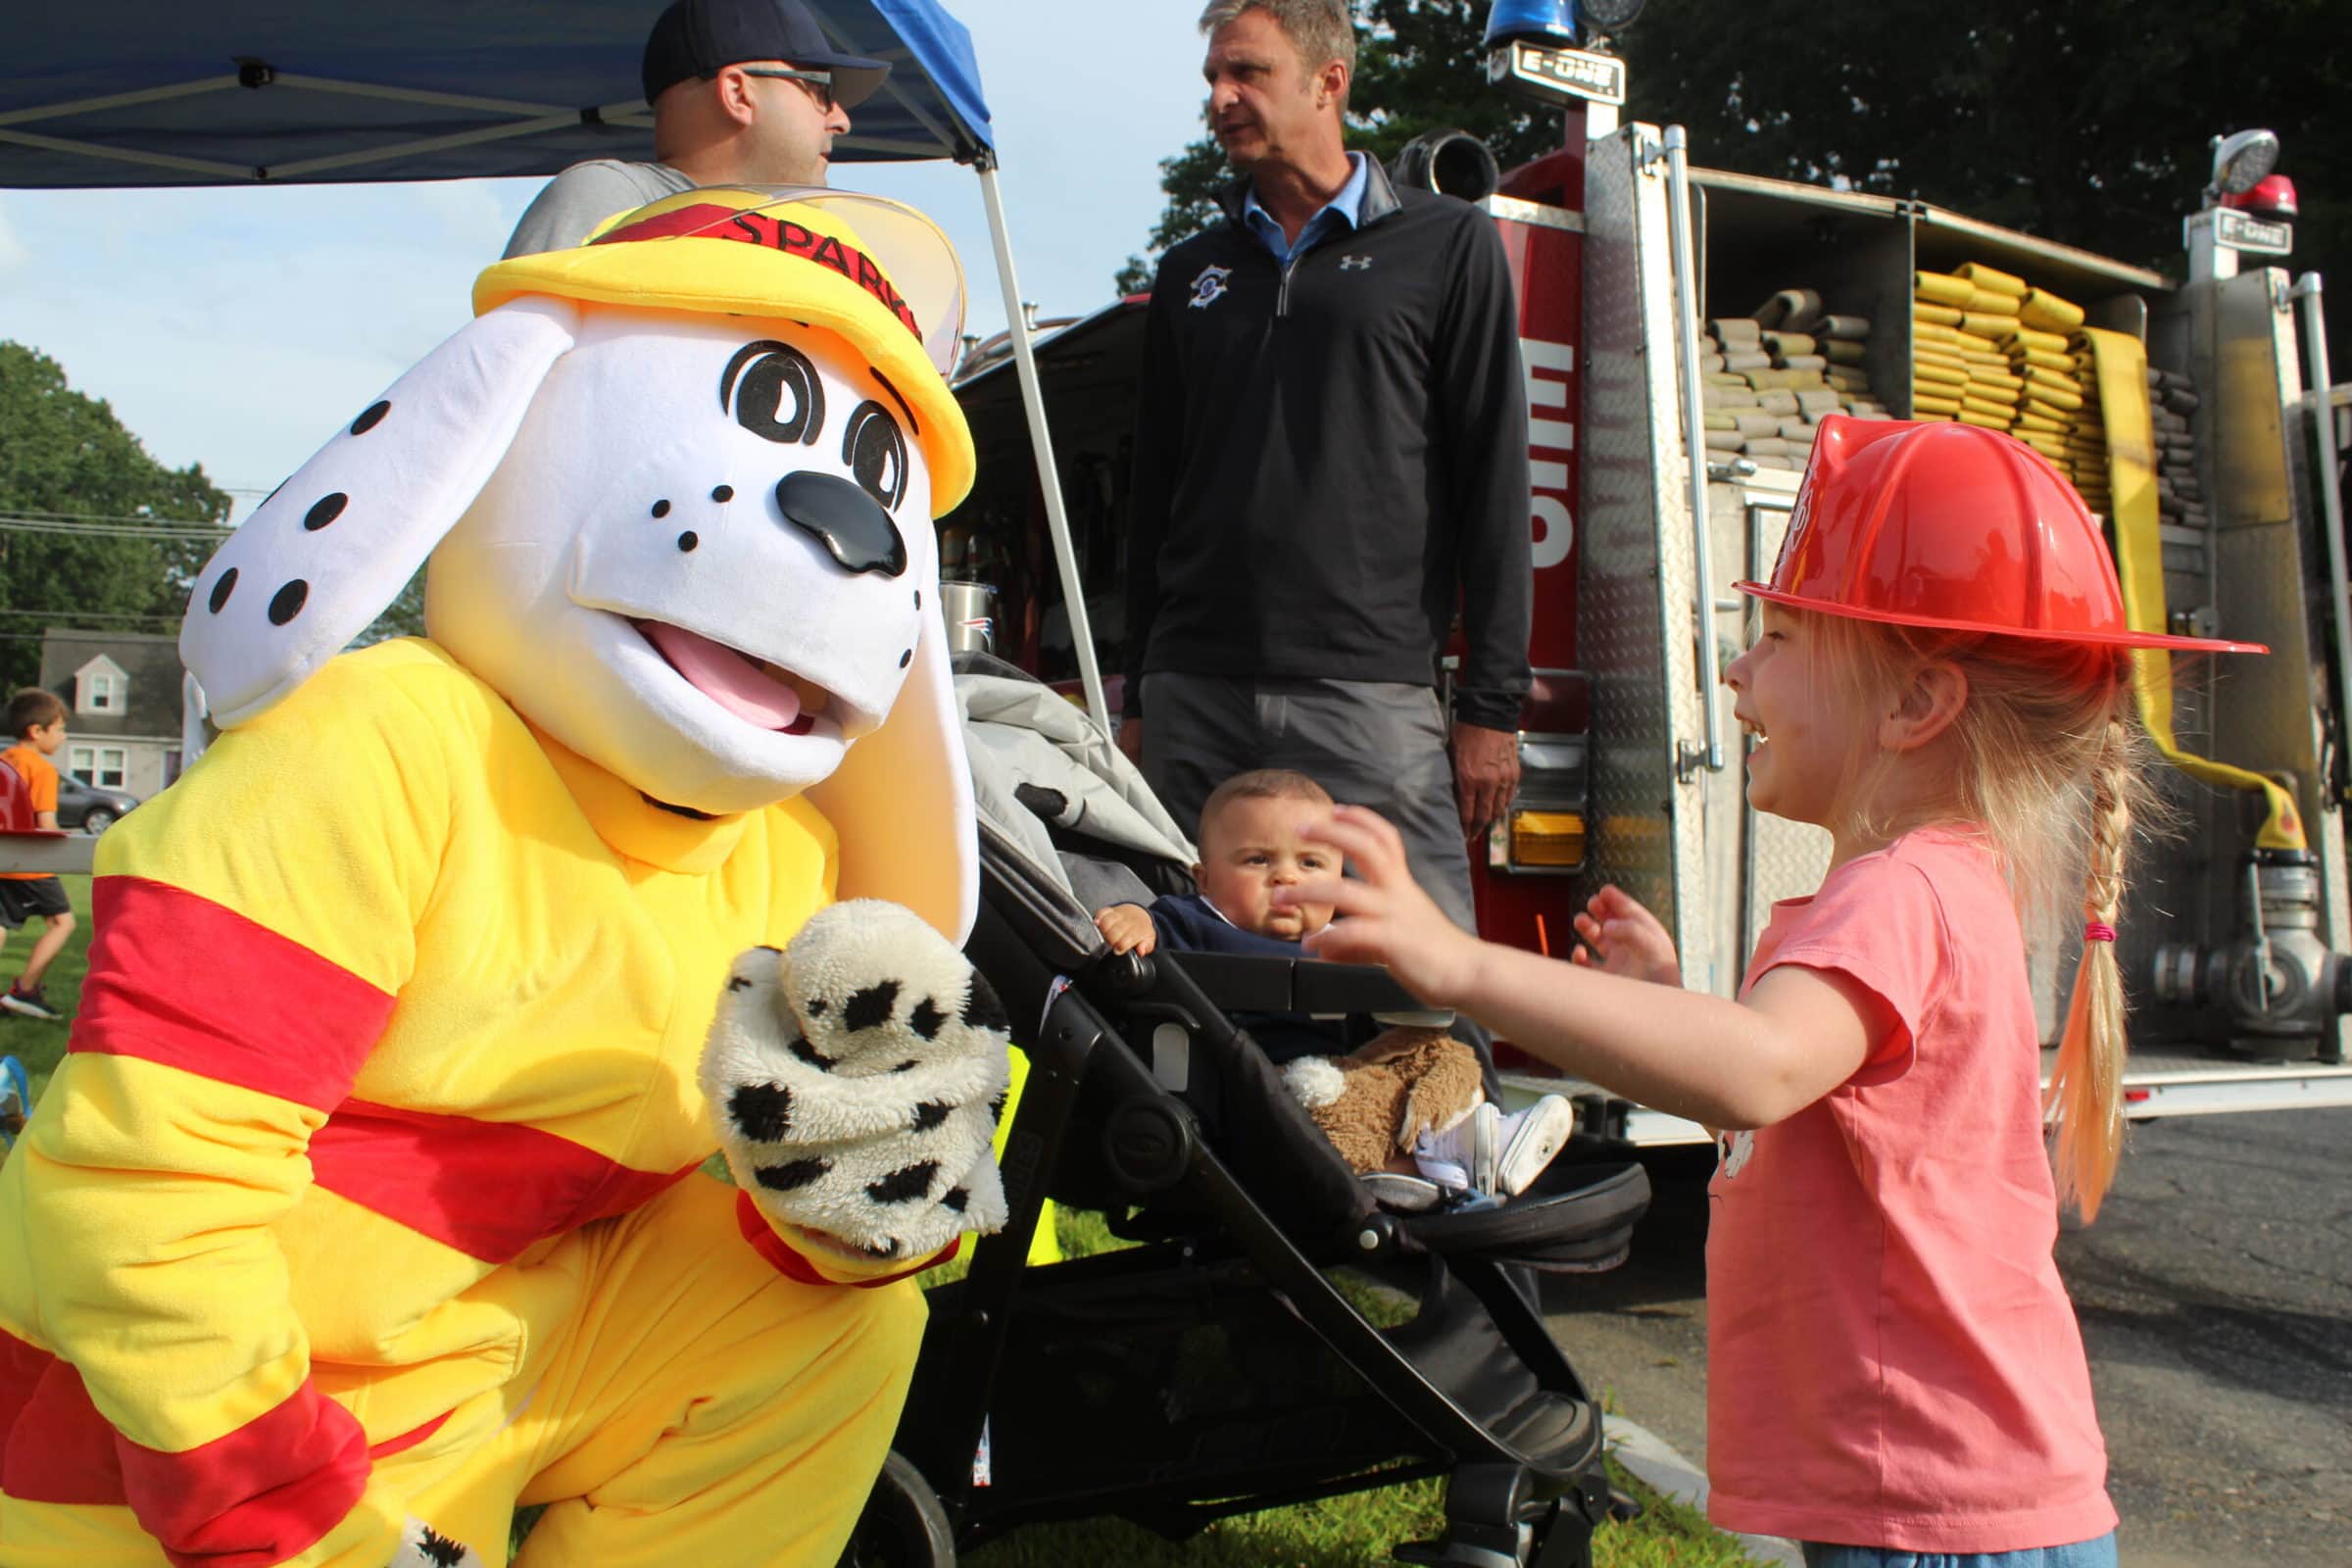 Amalia Mulcahy was excited to see Sparky the Fire Dog during National Night Out.